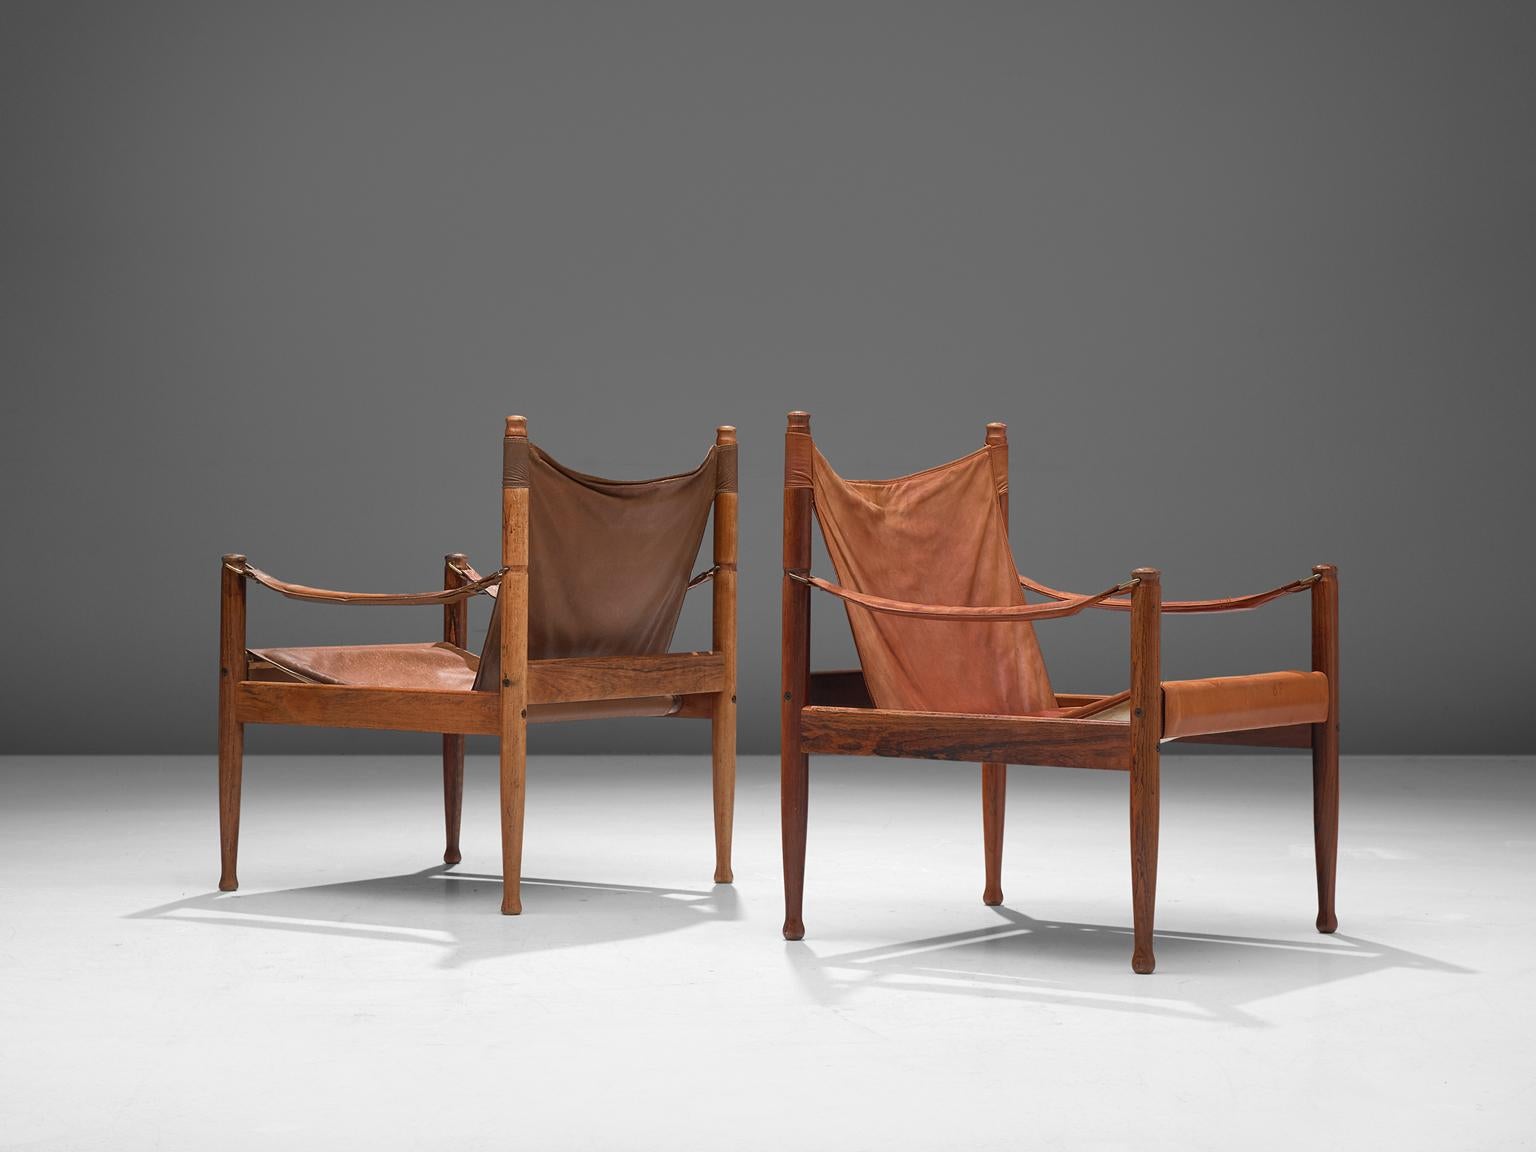 Erik Wørts for Niels Eilsersen, pair of armchairs, rosewood and leather, Denmark, 1960s. 

These sturdy lounge chairs with refined detail are designed by Danish designer Erik Wørts. The safari easy chairs have a strong expression due to the leather